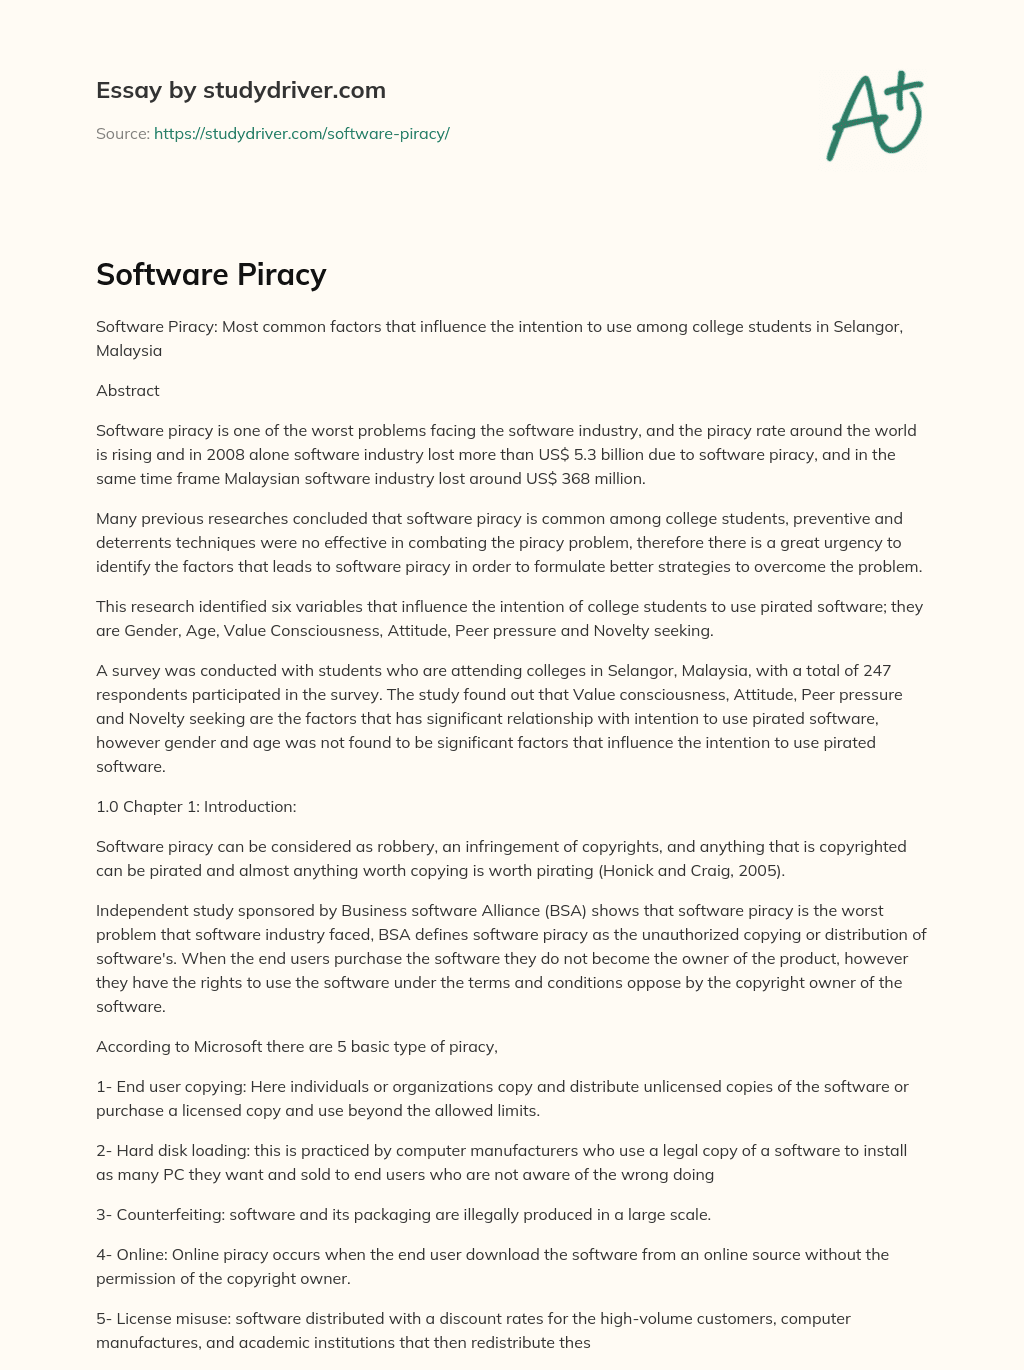 thesis statement about software piracy